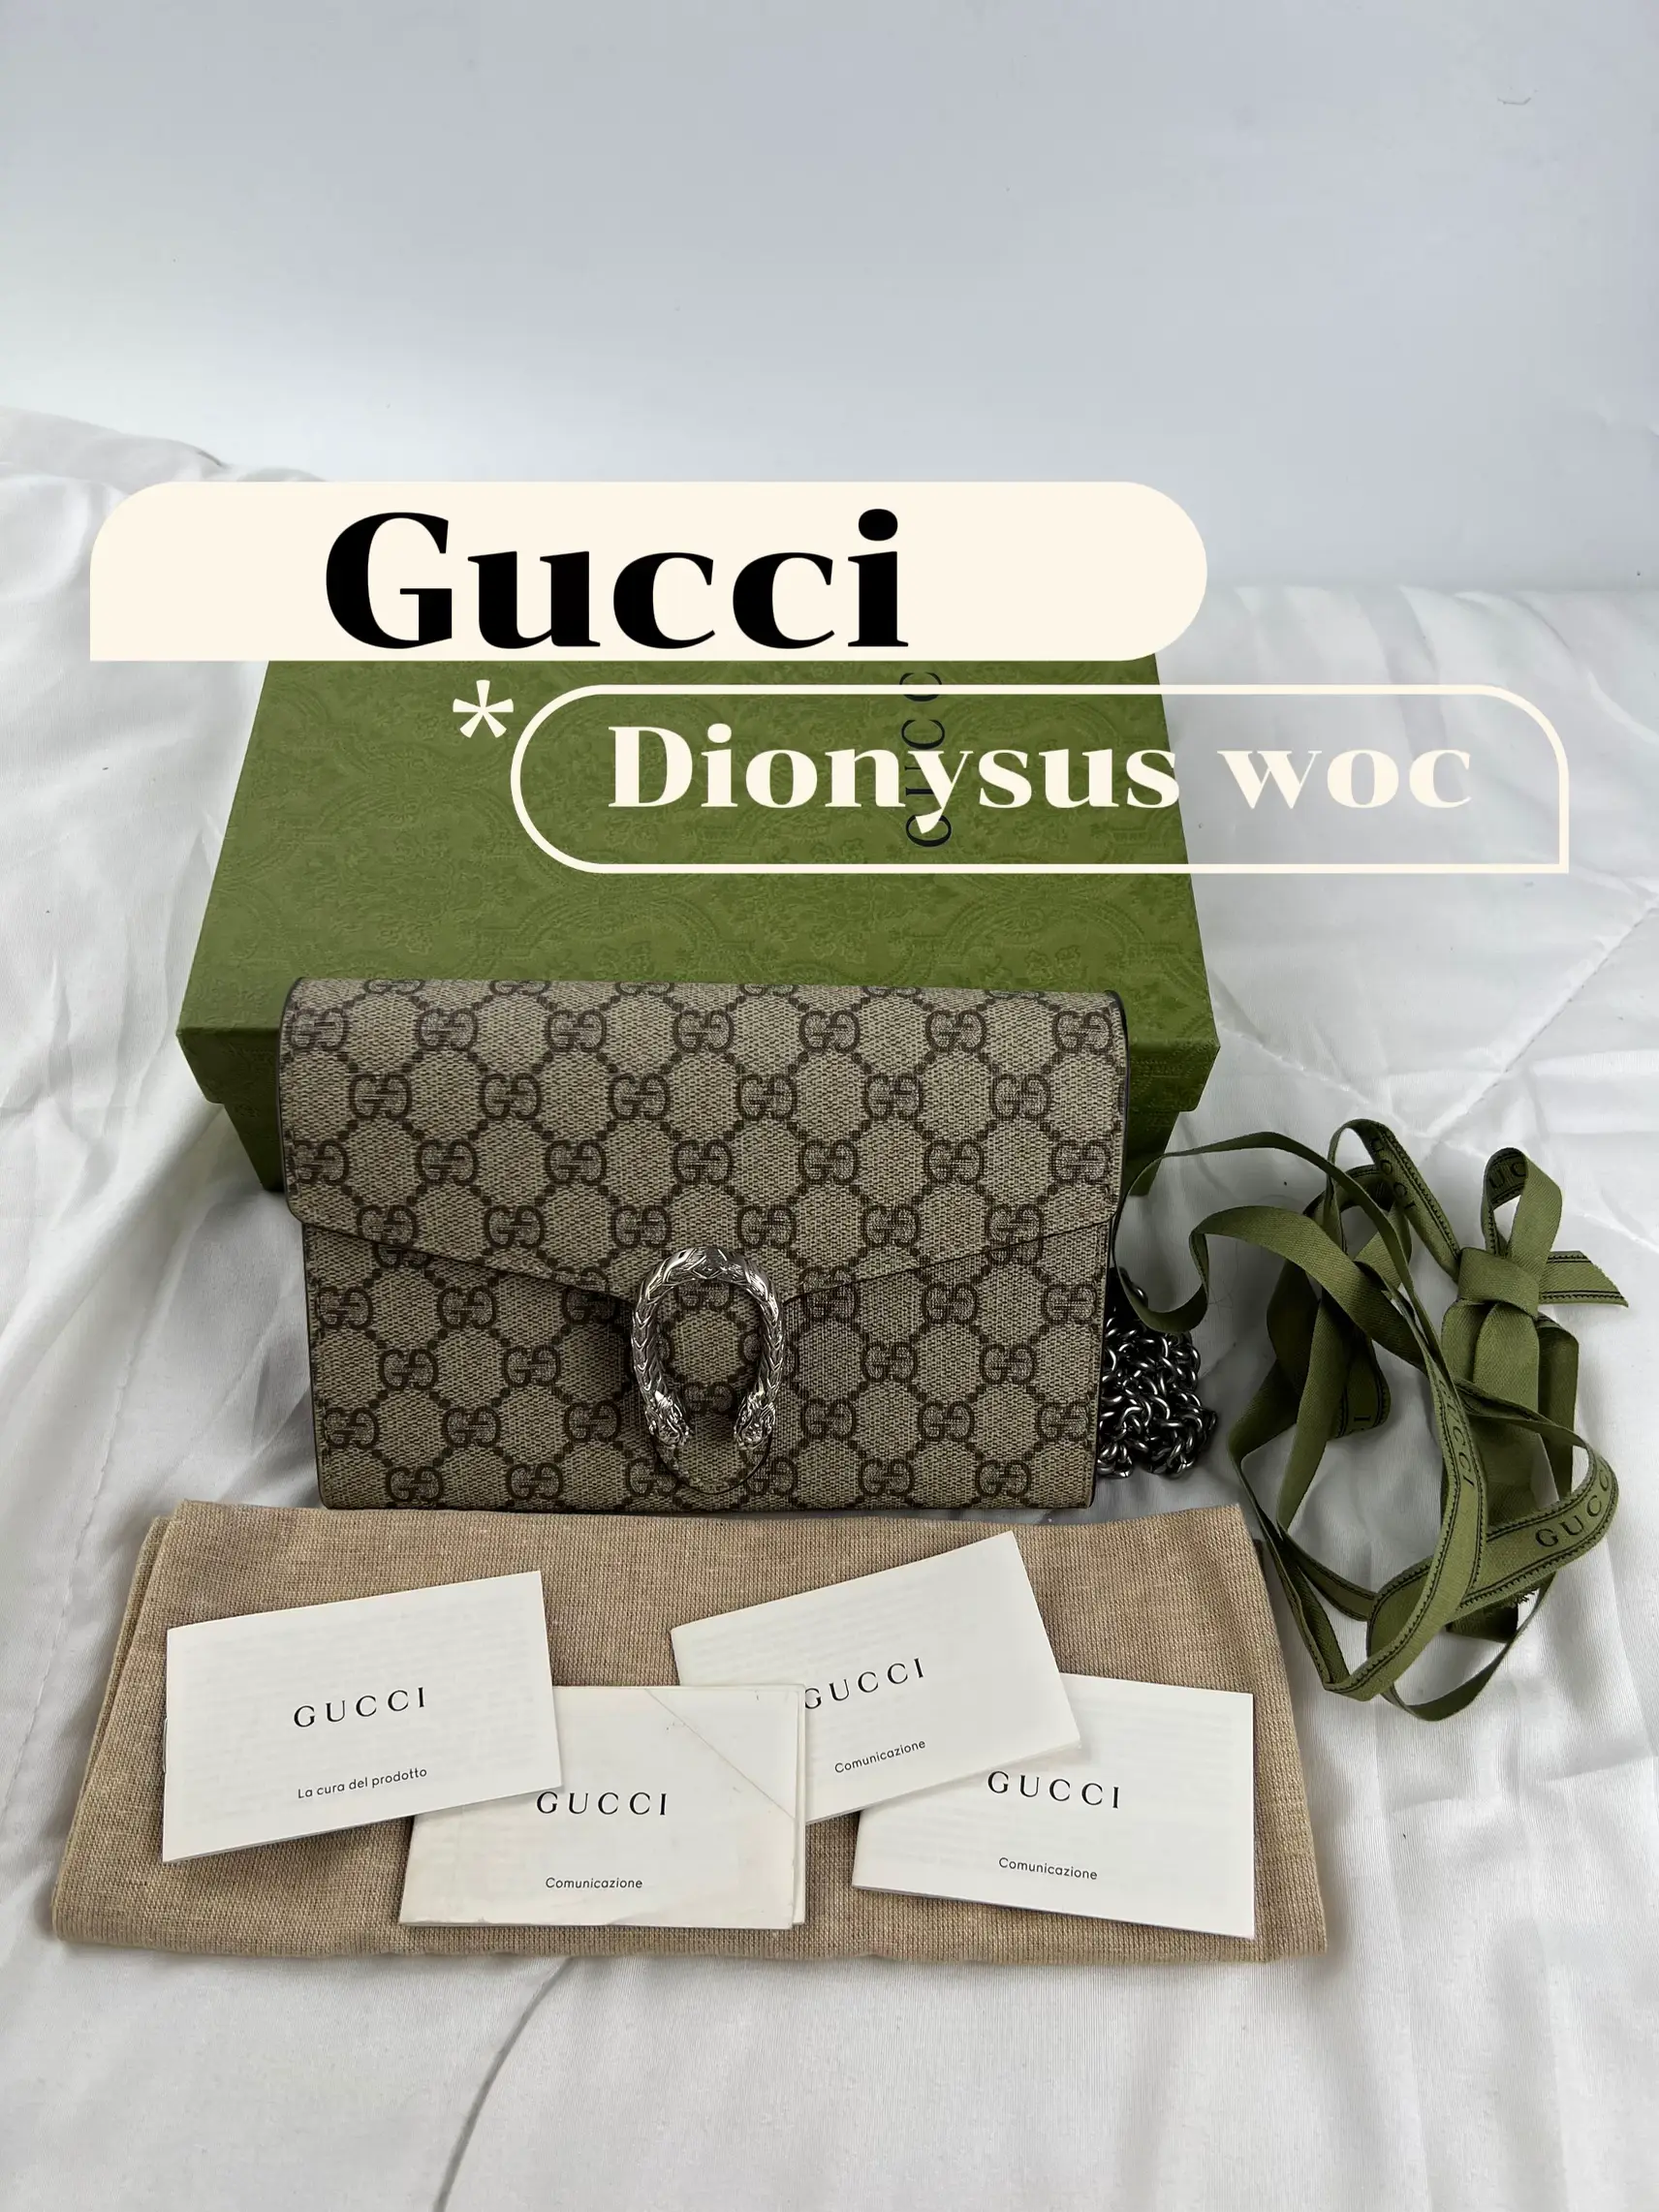 Gucci Dionysus woc ✨, Gallery posted by BrandnameVoyage